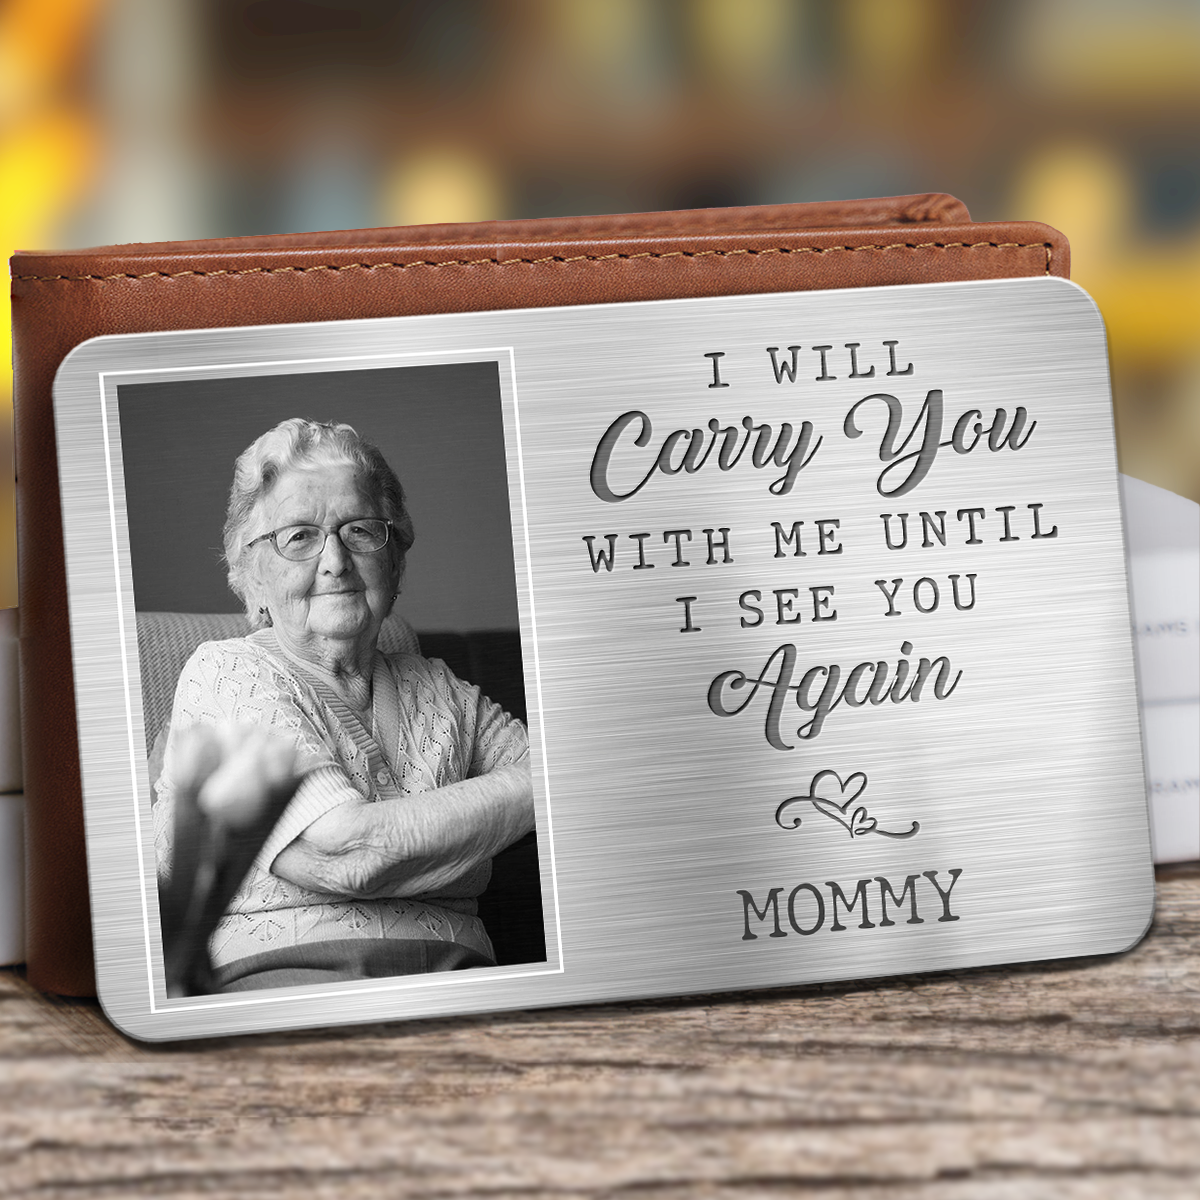 Discover Custom Photo I Will Carry You With Me Until I See You Again - Memorial Personalized Custom Aluminum Wallet Card - Sympathy Gift For Family Members